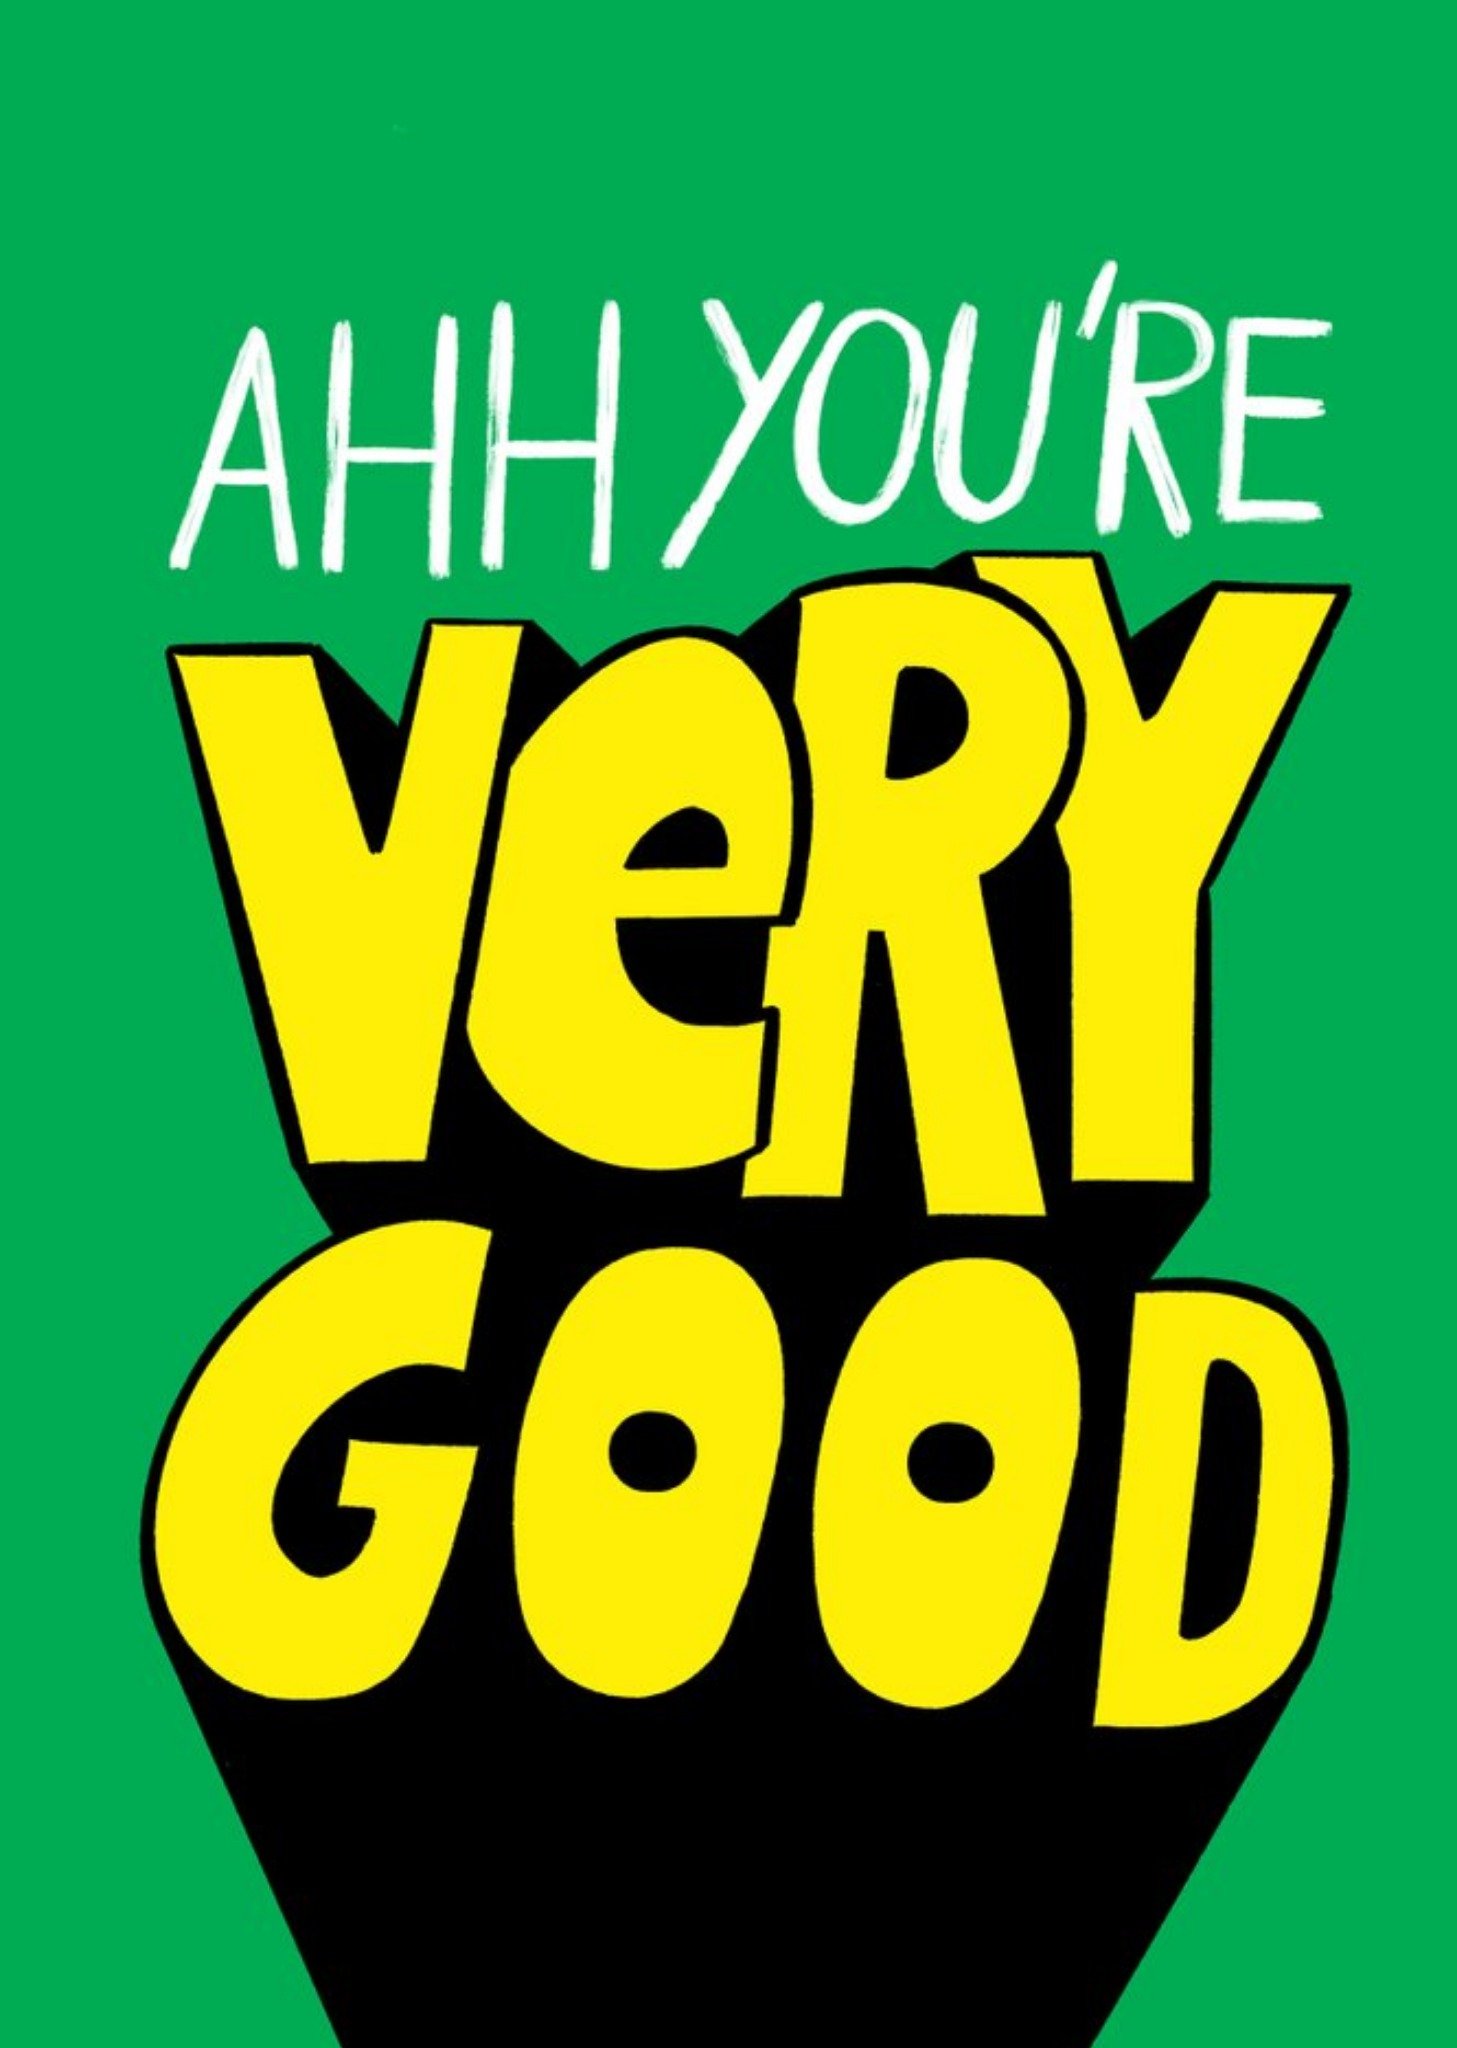 Moonpig Jacky Sheridan Typographic Ahh You're Very Good Congratulations Card, Large